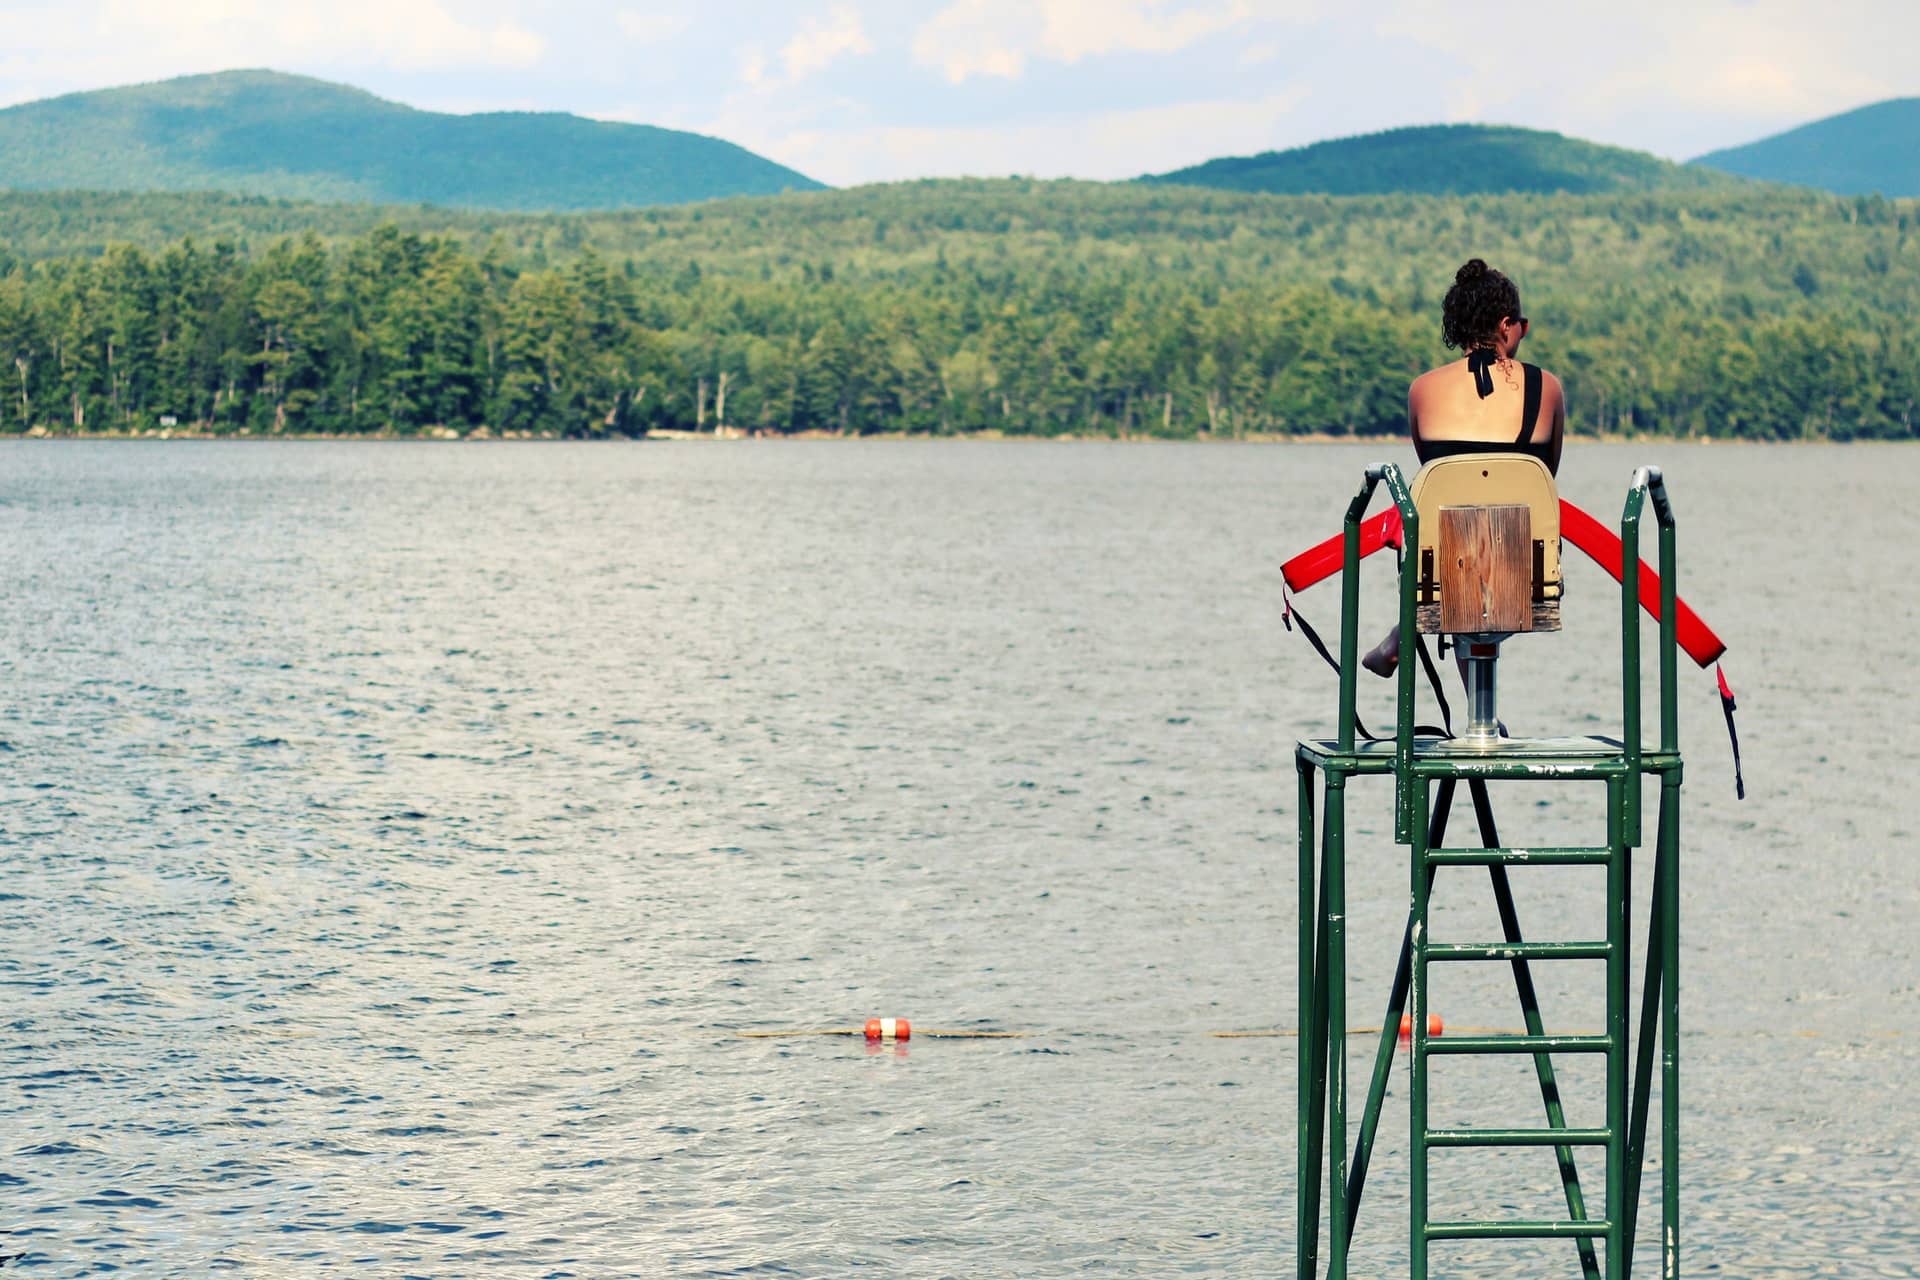 Lifeguard on tower overlooking a lake, representing drowning prevention and water safety